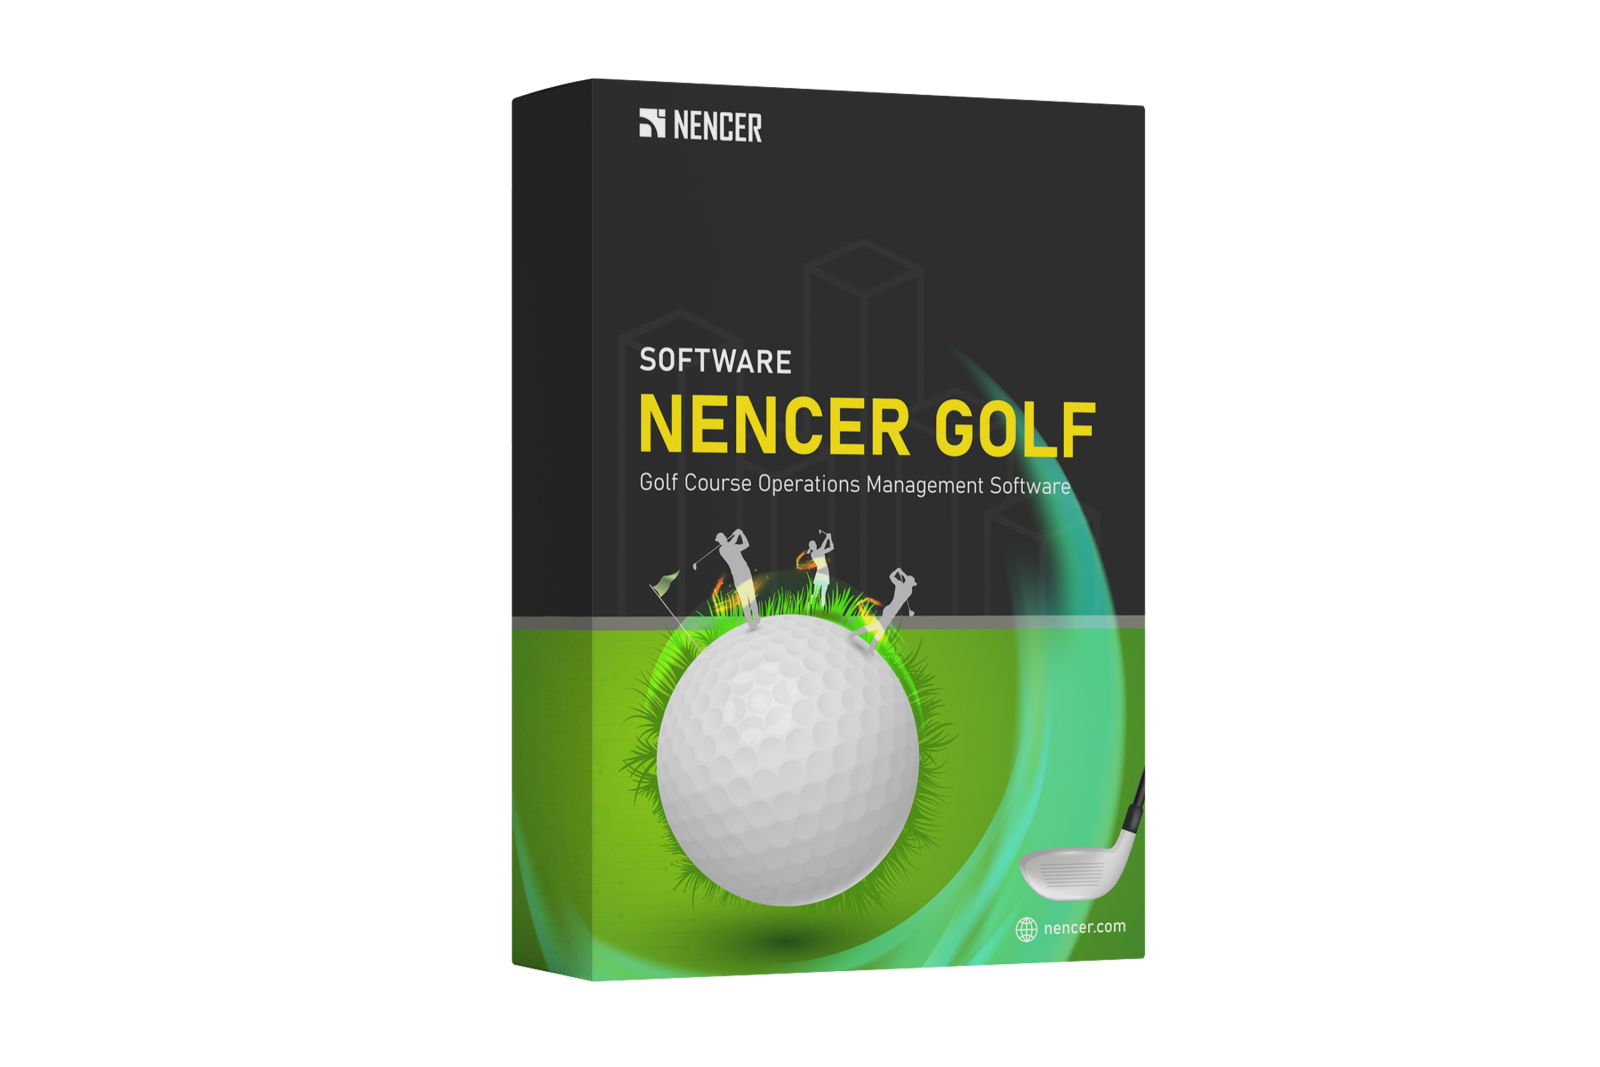 Golf Course Operations Management Software